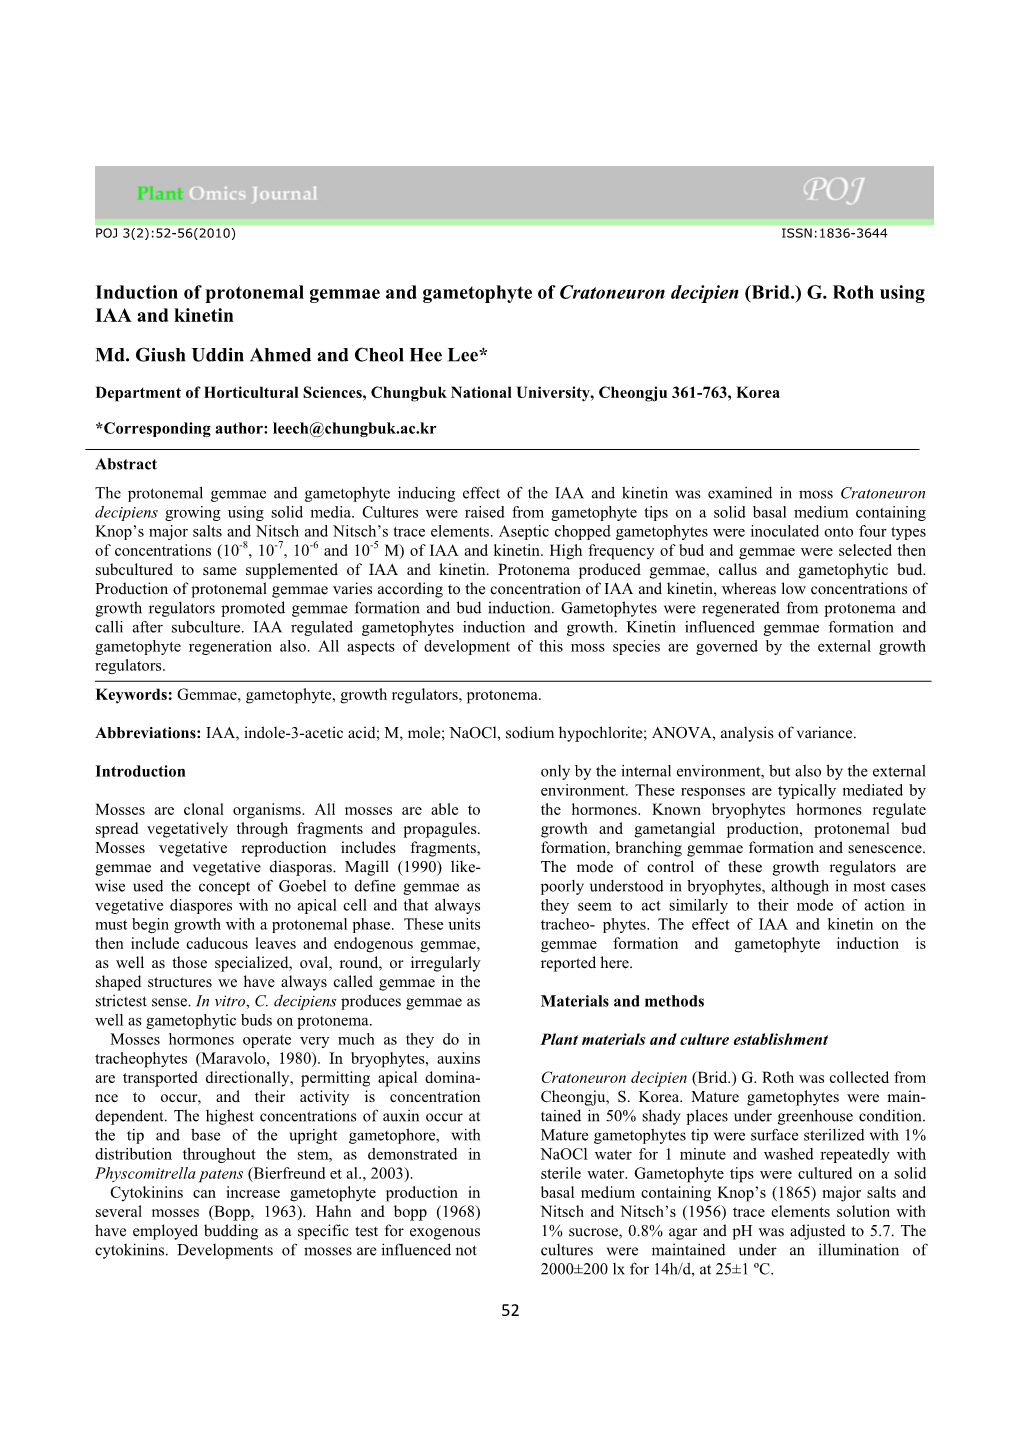 Induction of Protonemal Gemmae and Gametophyte of Cratoneuron Decipien (Brid.) G